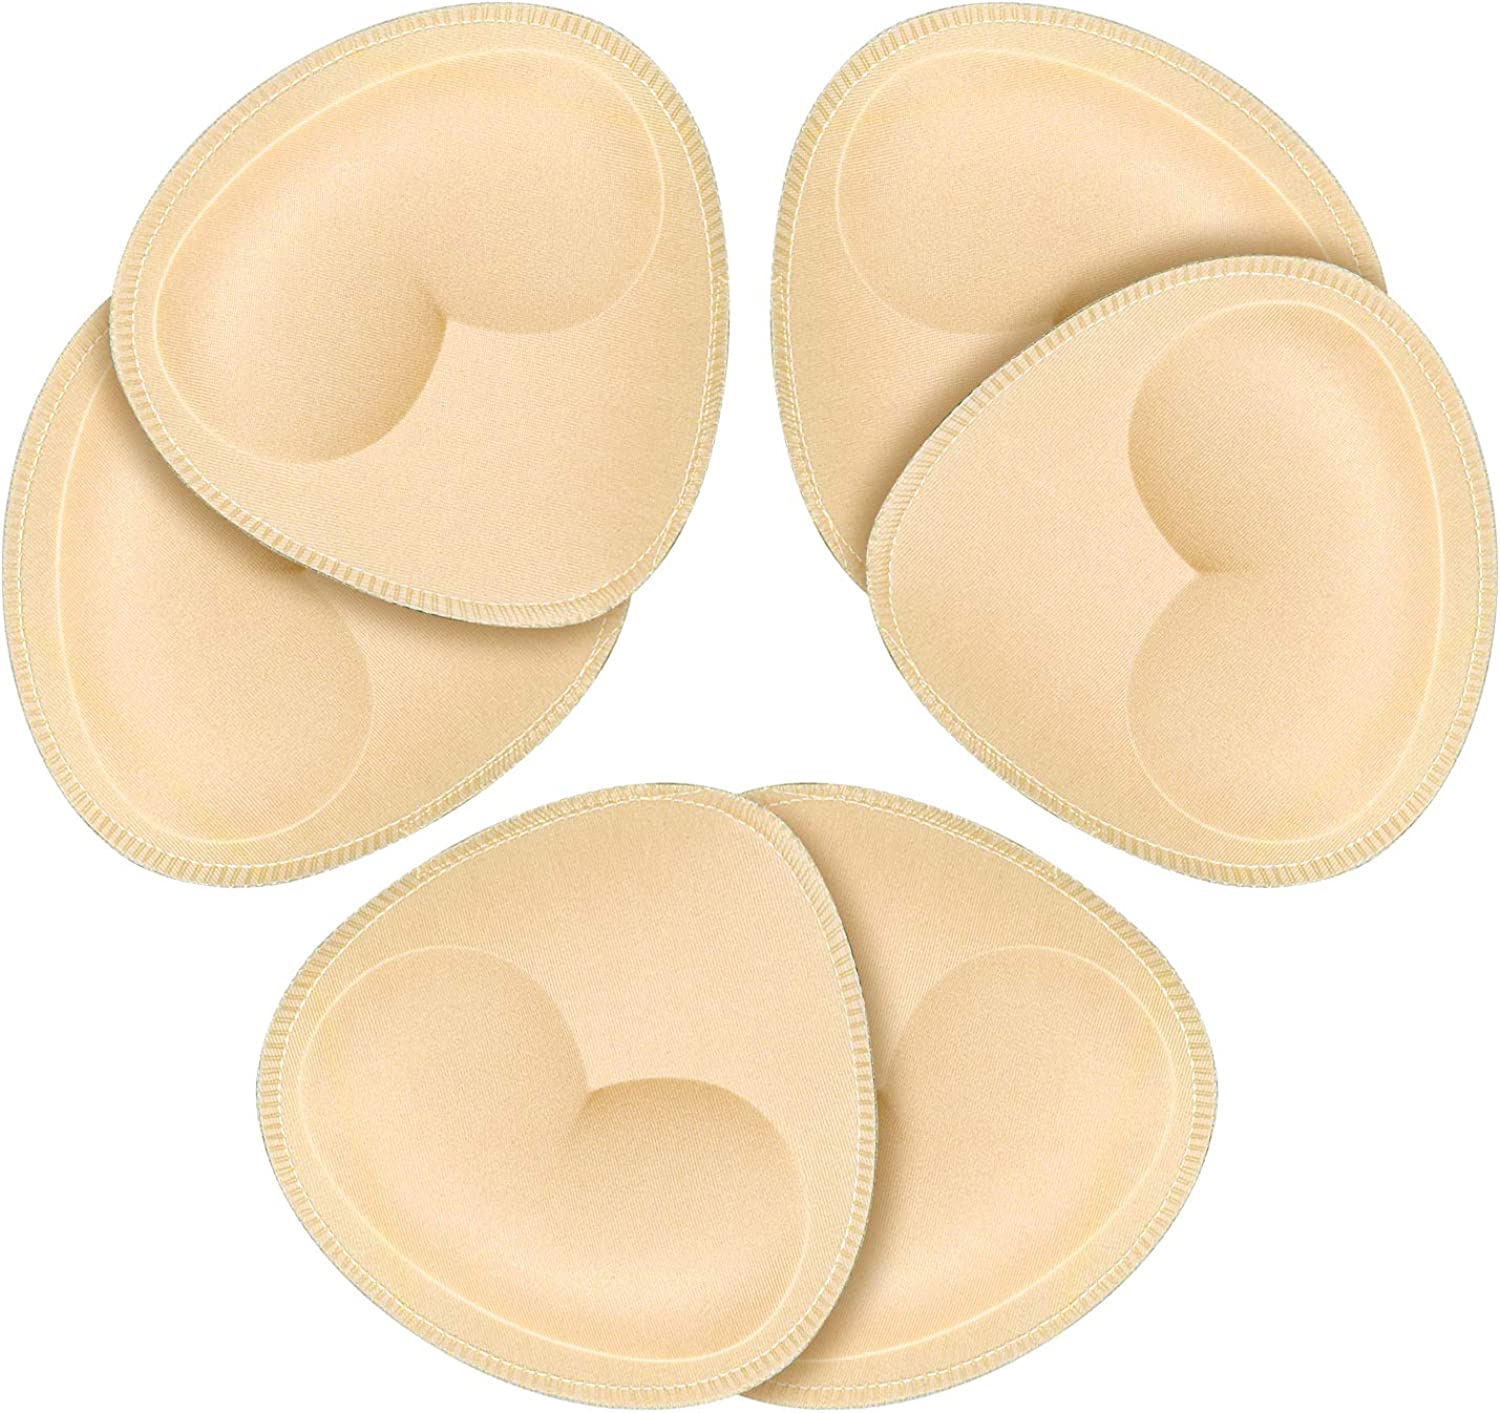 FANMAOUS 5 pairs Women's Triangle Bra Pads Inserts Removable Push